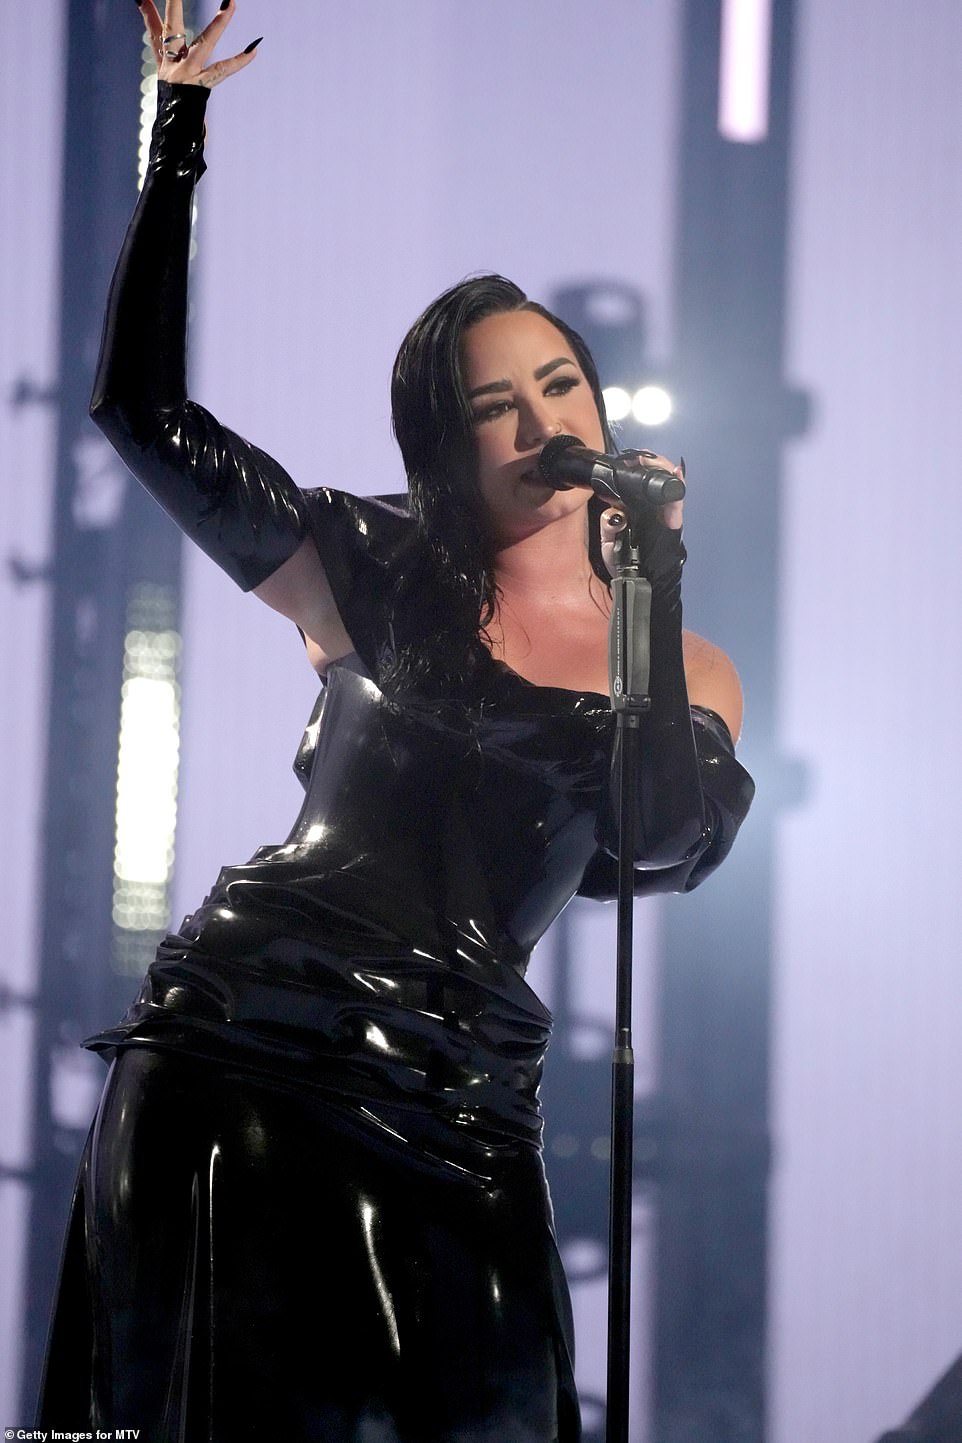 Wowing the crowd! Demi was among the A-listers dazzling audience members